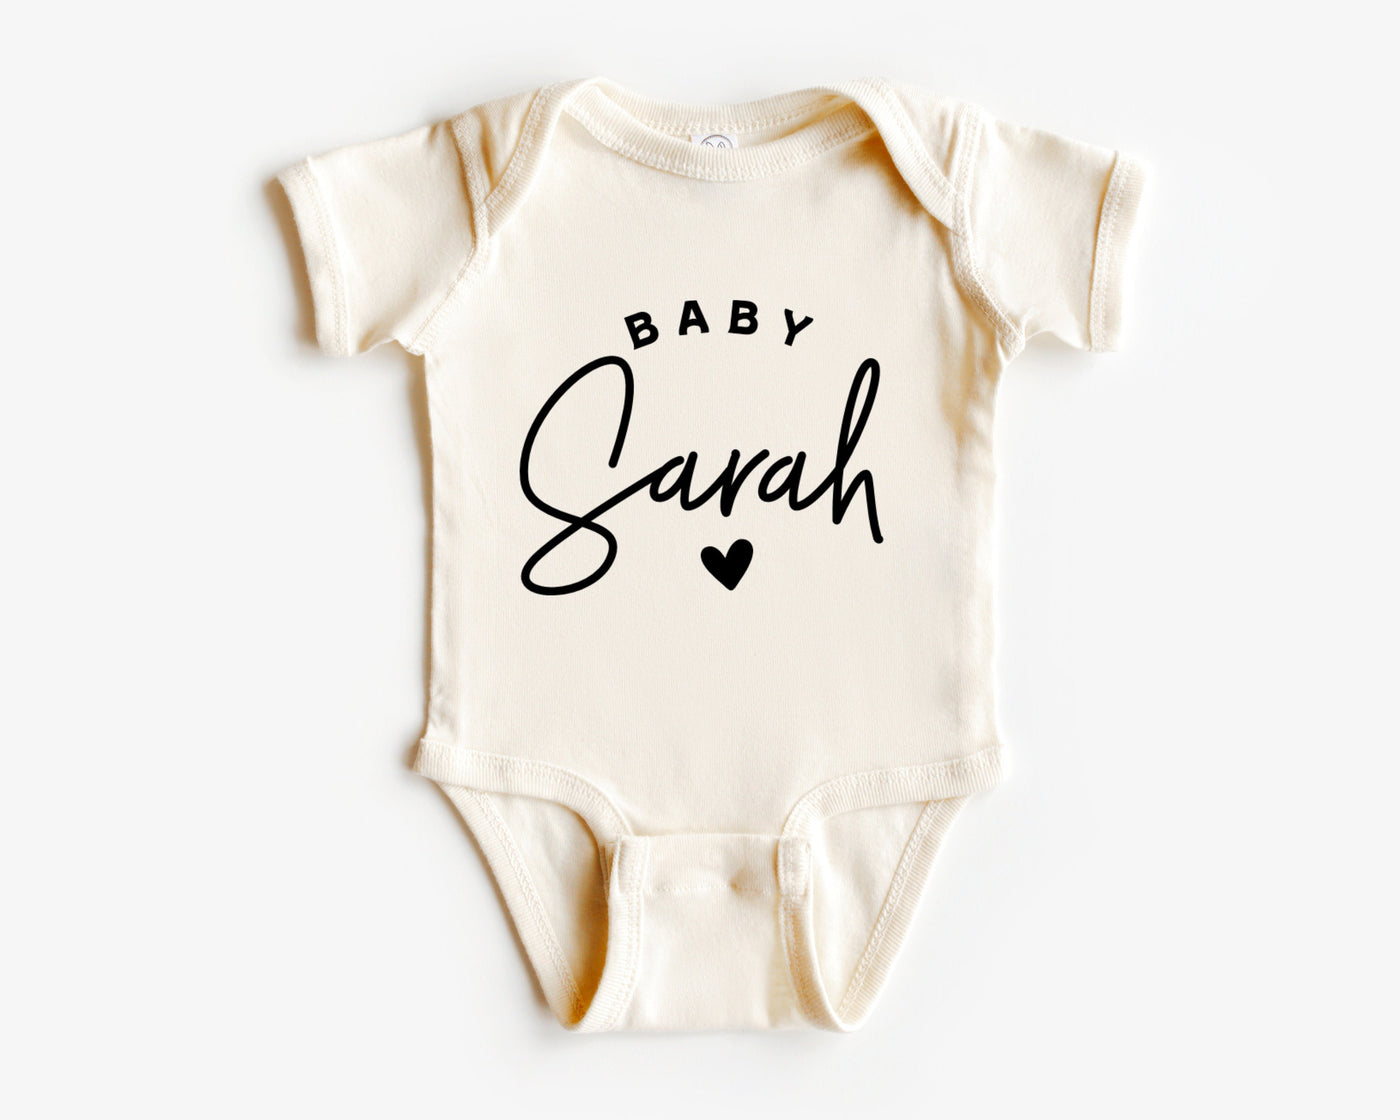 Baby Name Bodysuit, Personalized Coming Home Outfit, Custom Name Bodysuit, Neutral Baby Clothes, New Baby Boy Outfit, Newborn Name Bodysuit